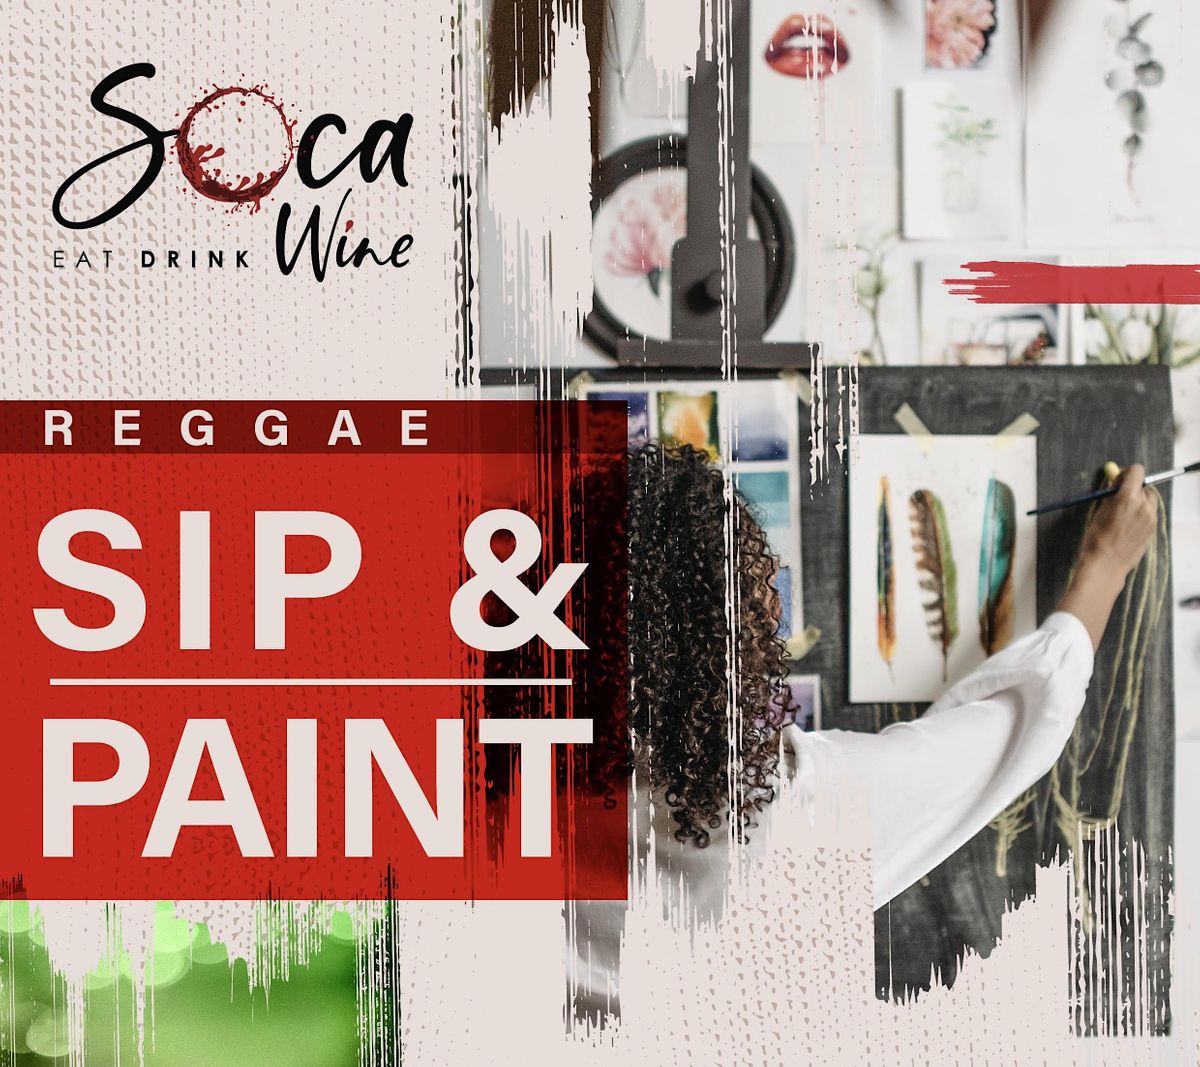 Reggae Sip Paint & Party PHILLY